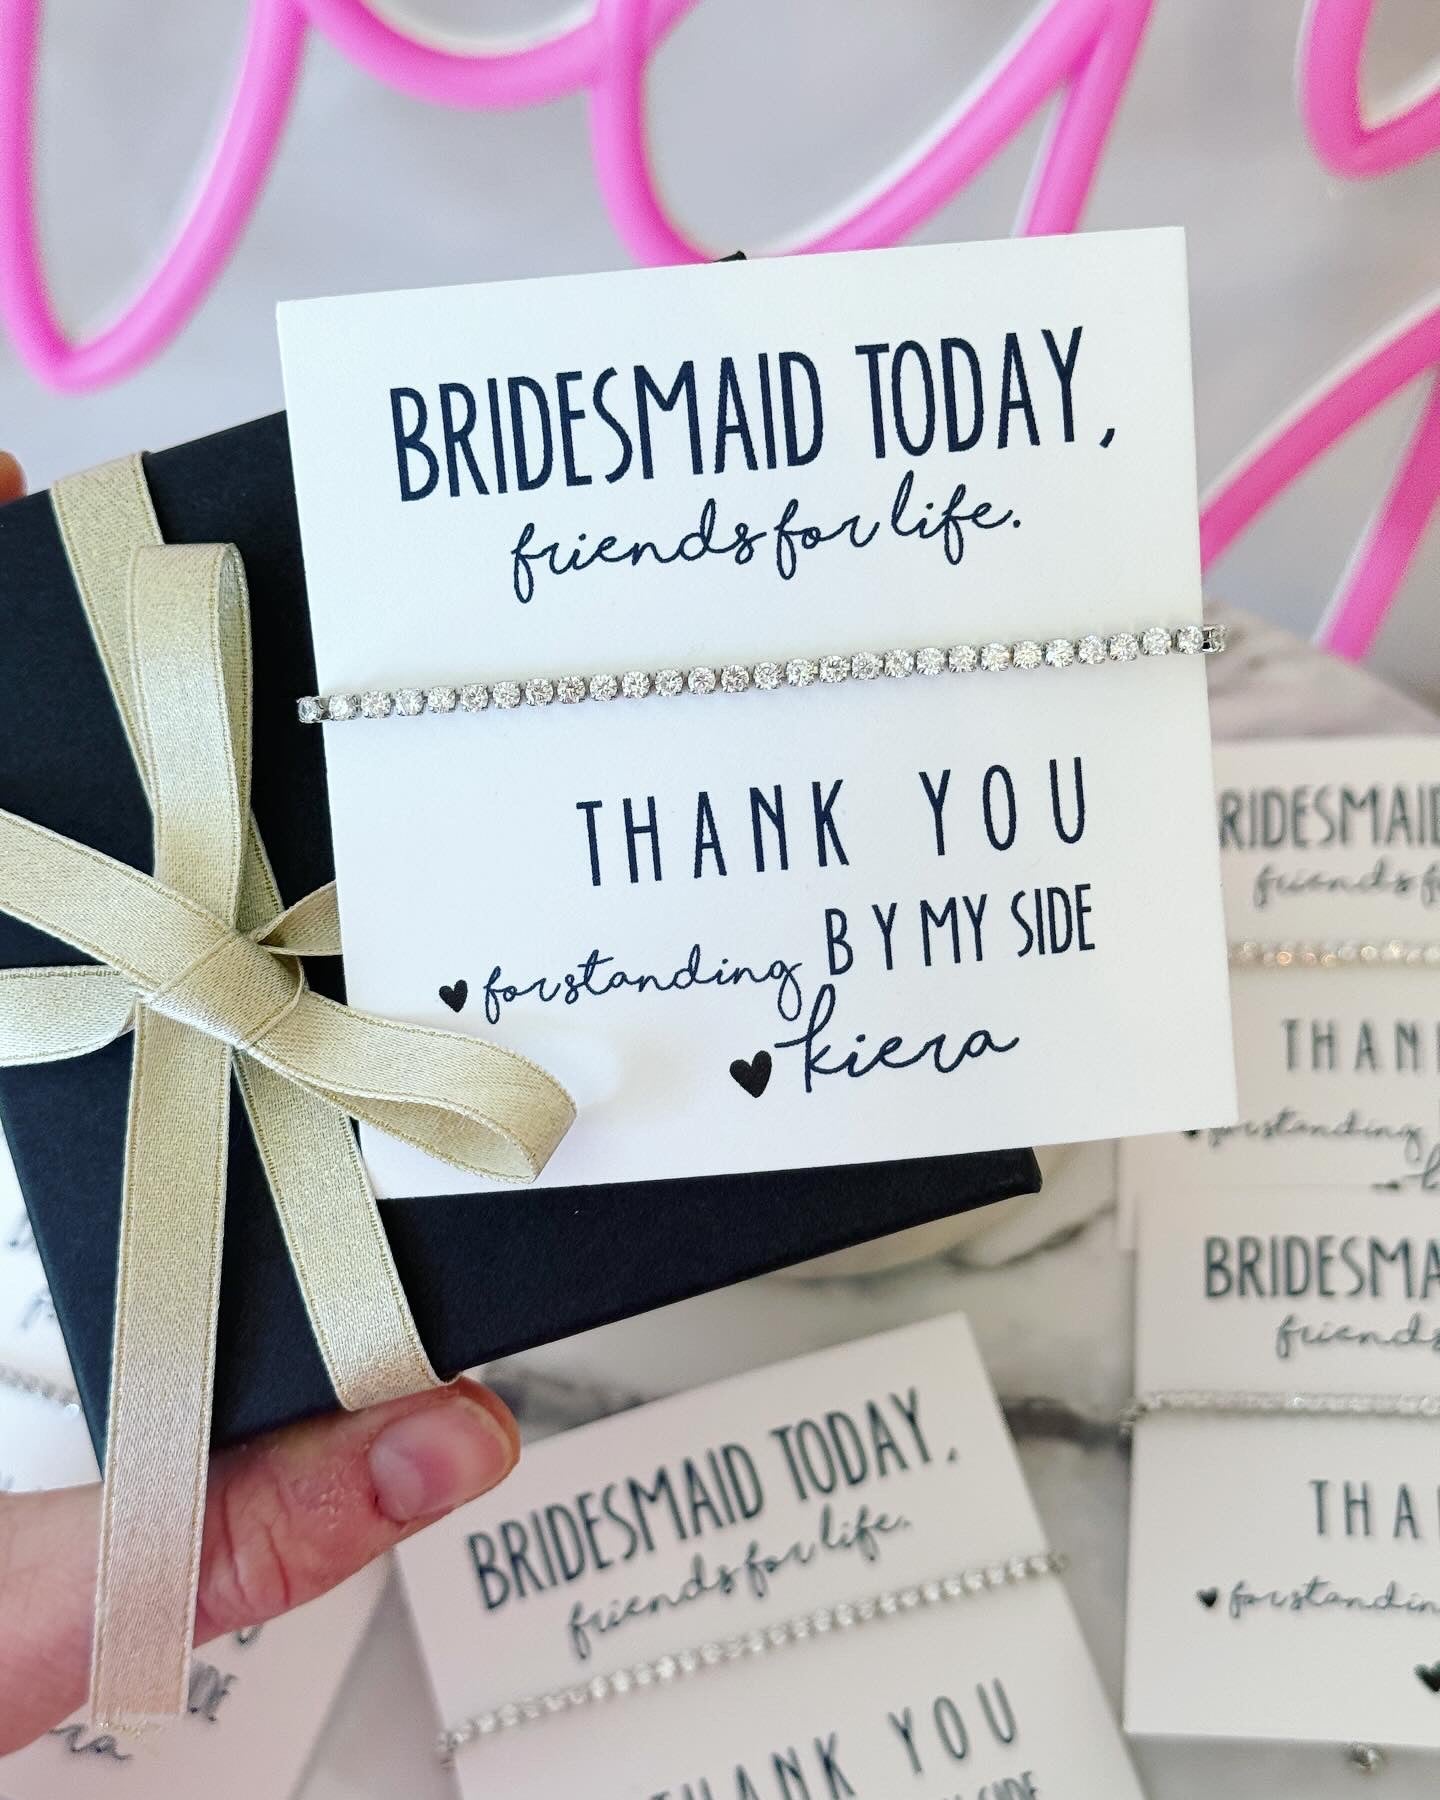 Bridesmaid Today, Friends for Life Bridal Party Bracelet